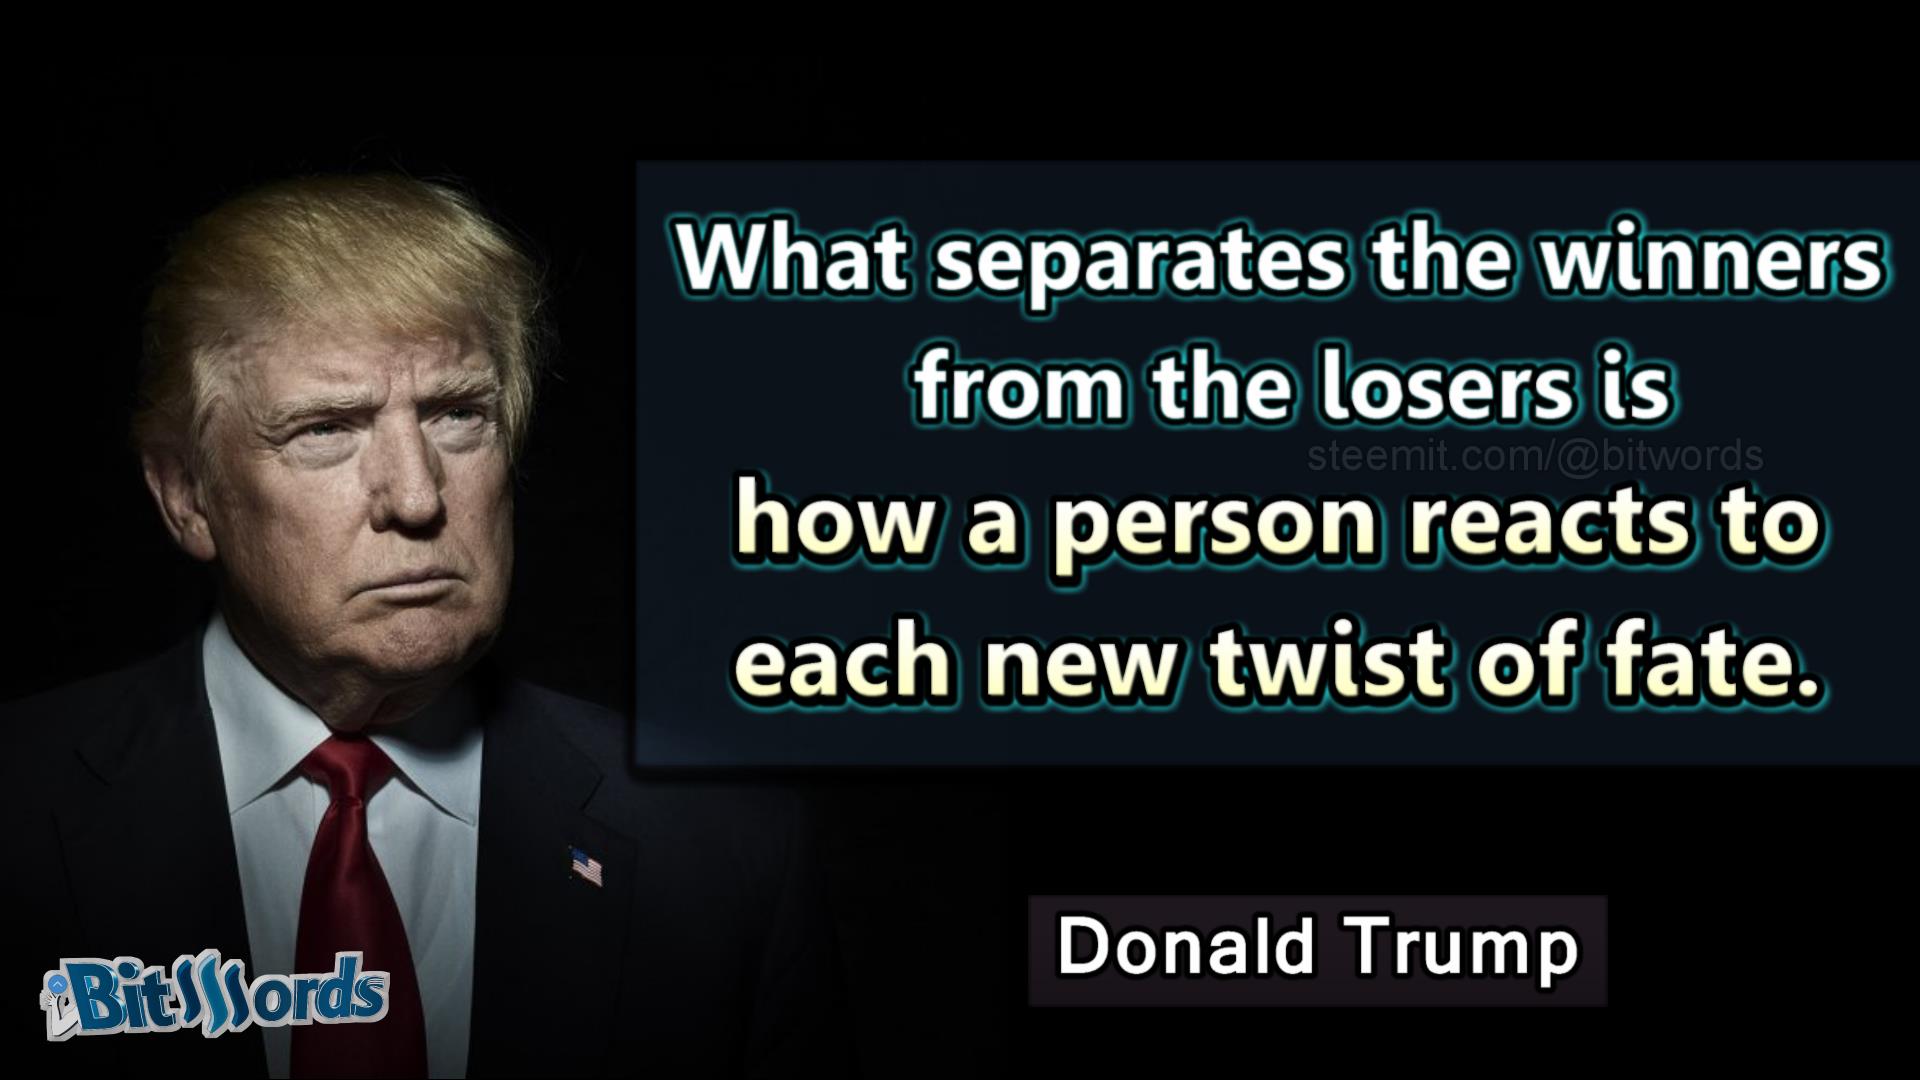 bitwords steemit What separates the winners from the losers is how a person reacts to each new twist of fate ddonald trump.jpg